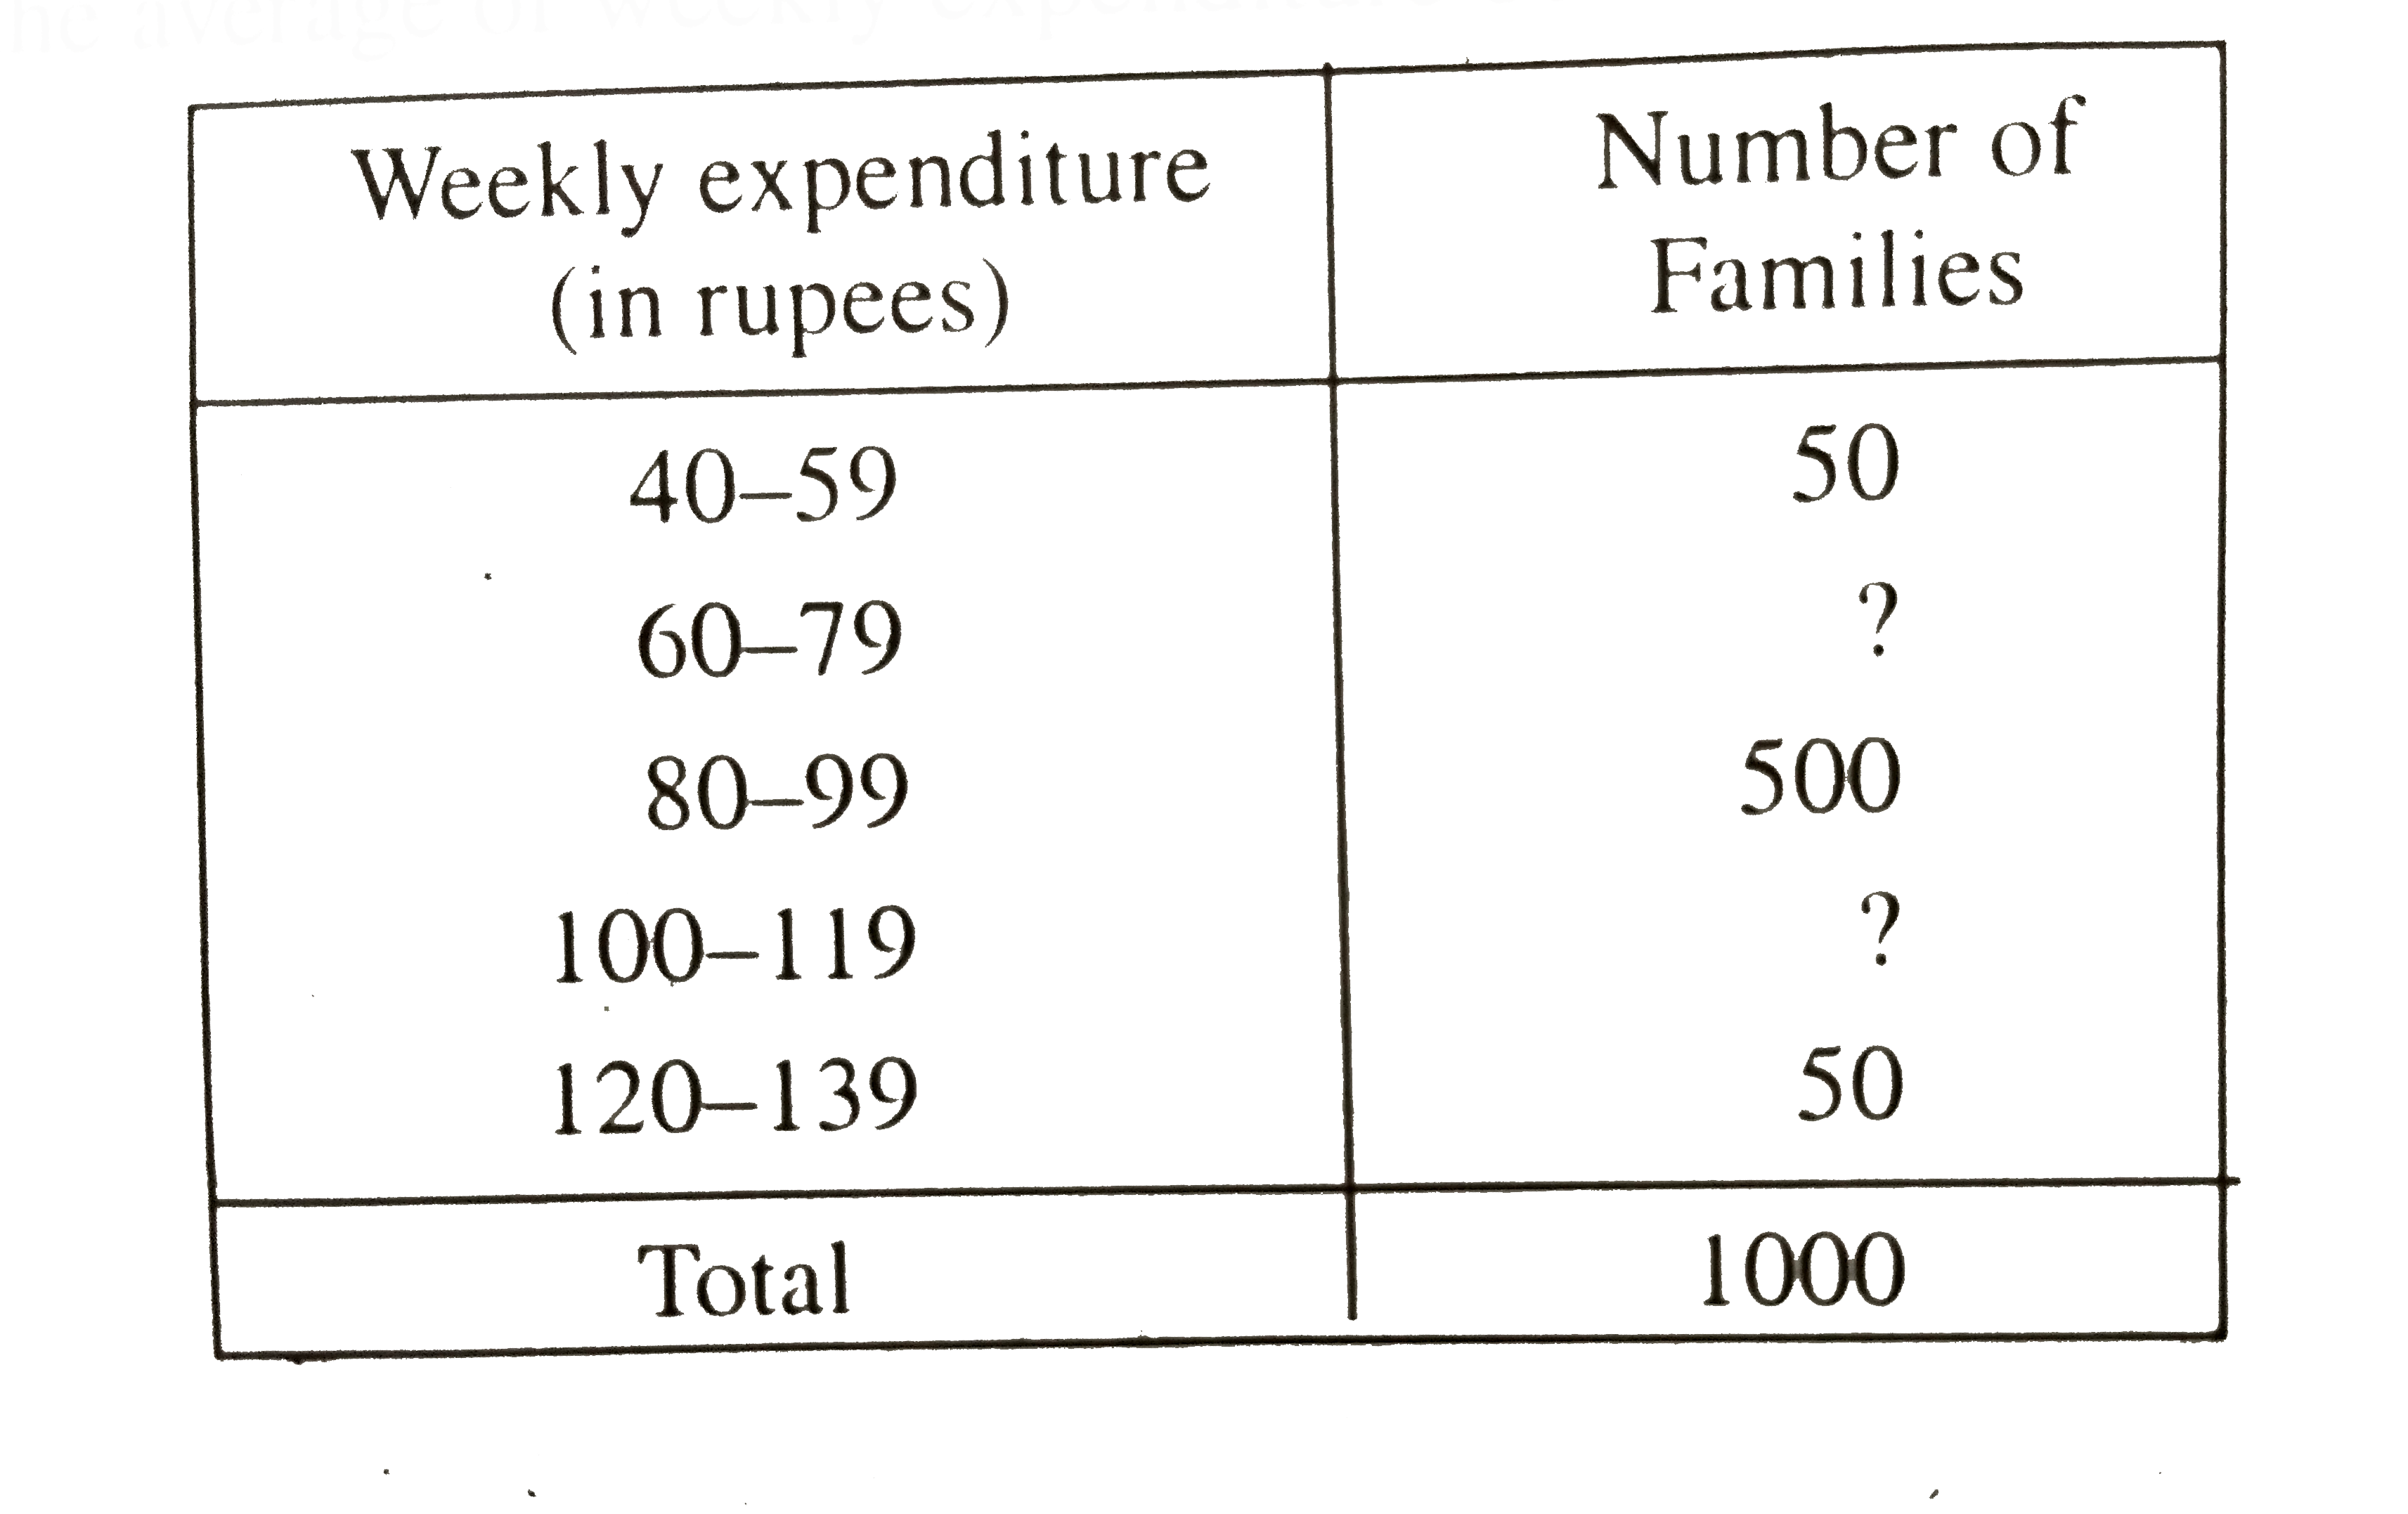 Part of the weekly expenditure of 1000 families is given in the following frequency distrution table. If the average of weekly expenditure be Rs. 87.50 , find the lost frequency.